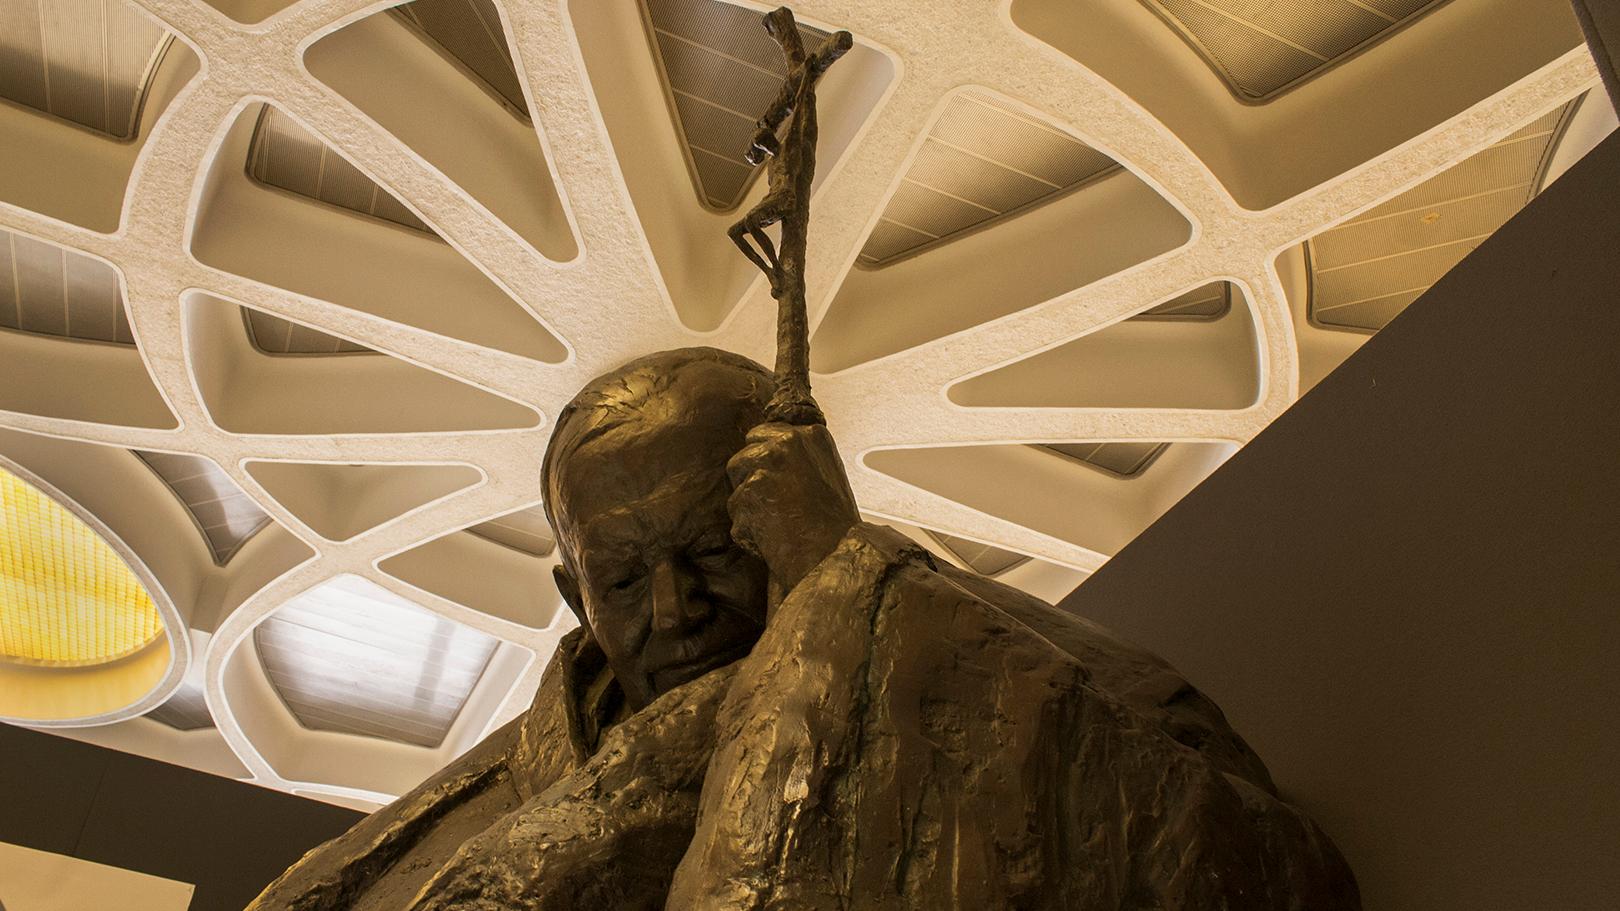 A bronze statue inside the Vatican of the late Pope John Paul II, who died in 2005 and became a saint on April 27, 2014.